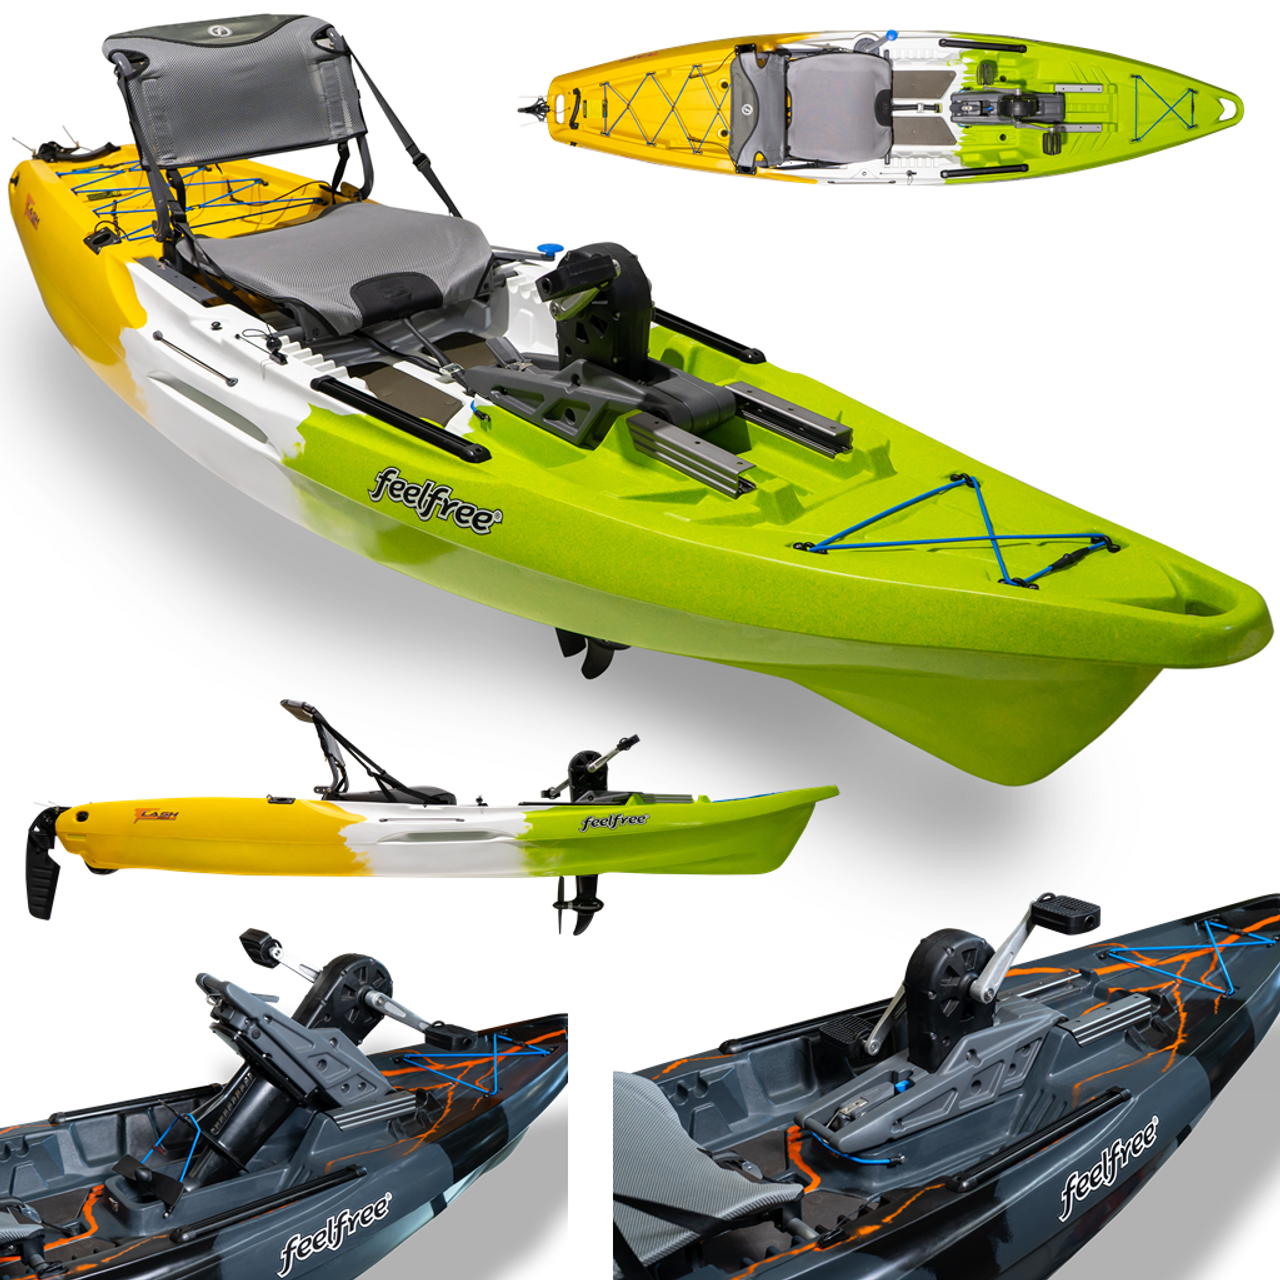 https://cdn11.bigcommerce.com/s-f3xbgyp2hq/images/stencil/1280x1280/products/2669/22155/FeelFree_Flash_Pedal_Drive_Fishing_Kayak_-_Kayak_City_Melon__24313.1652829613.png?c=2